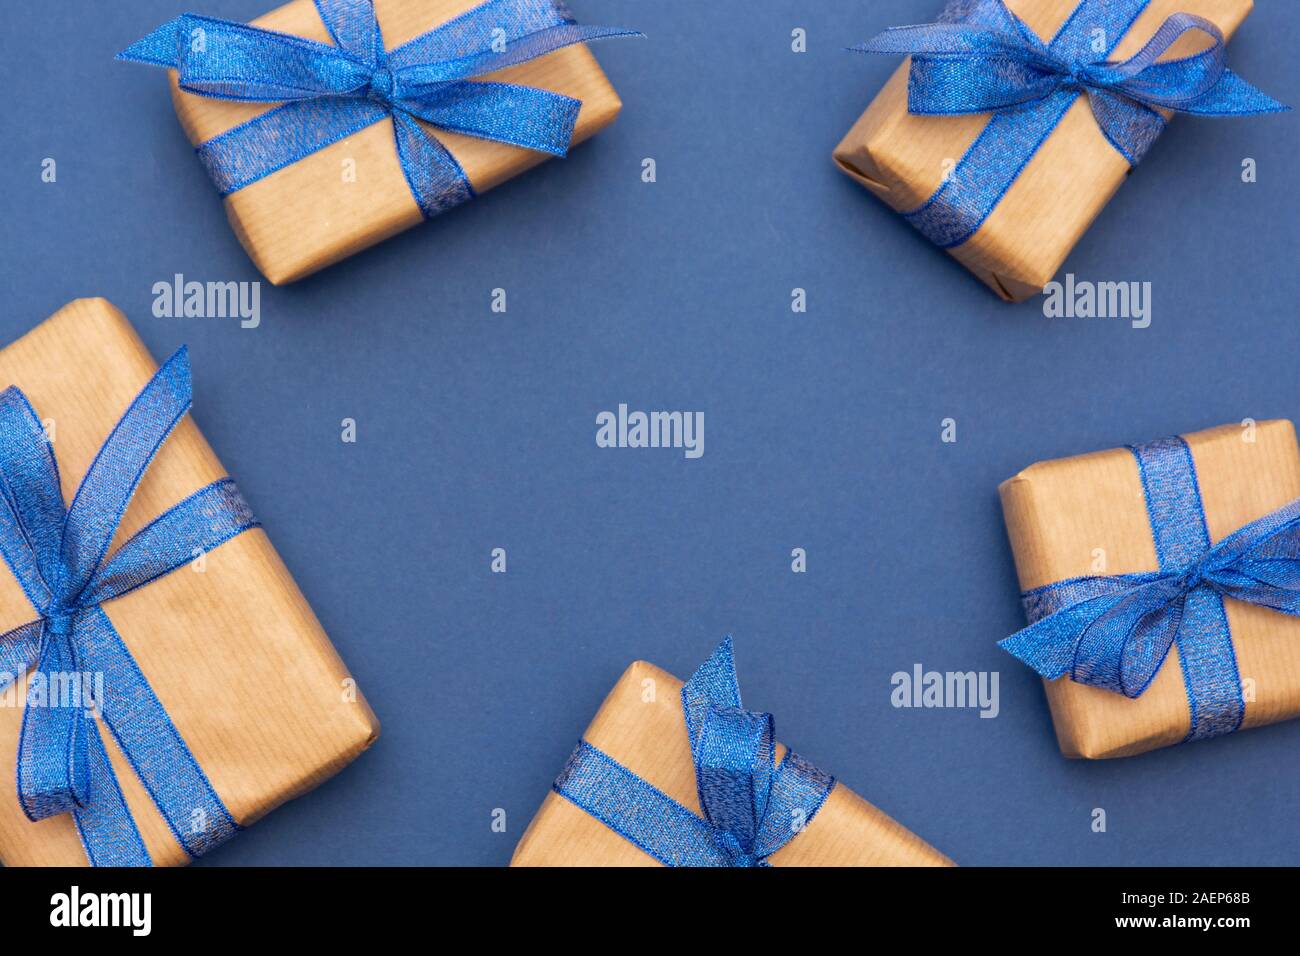 Christmas or birthday presents frame or border. Craft paper wrapped gift boxes on blue background, flat lay. Copy space. Stock Photo